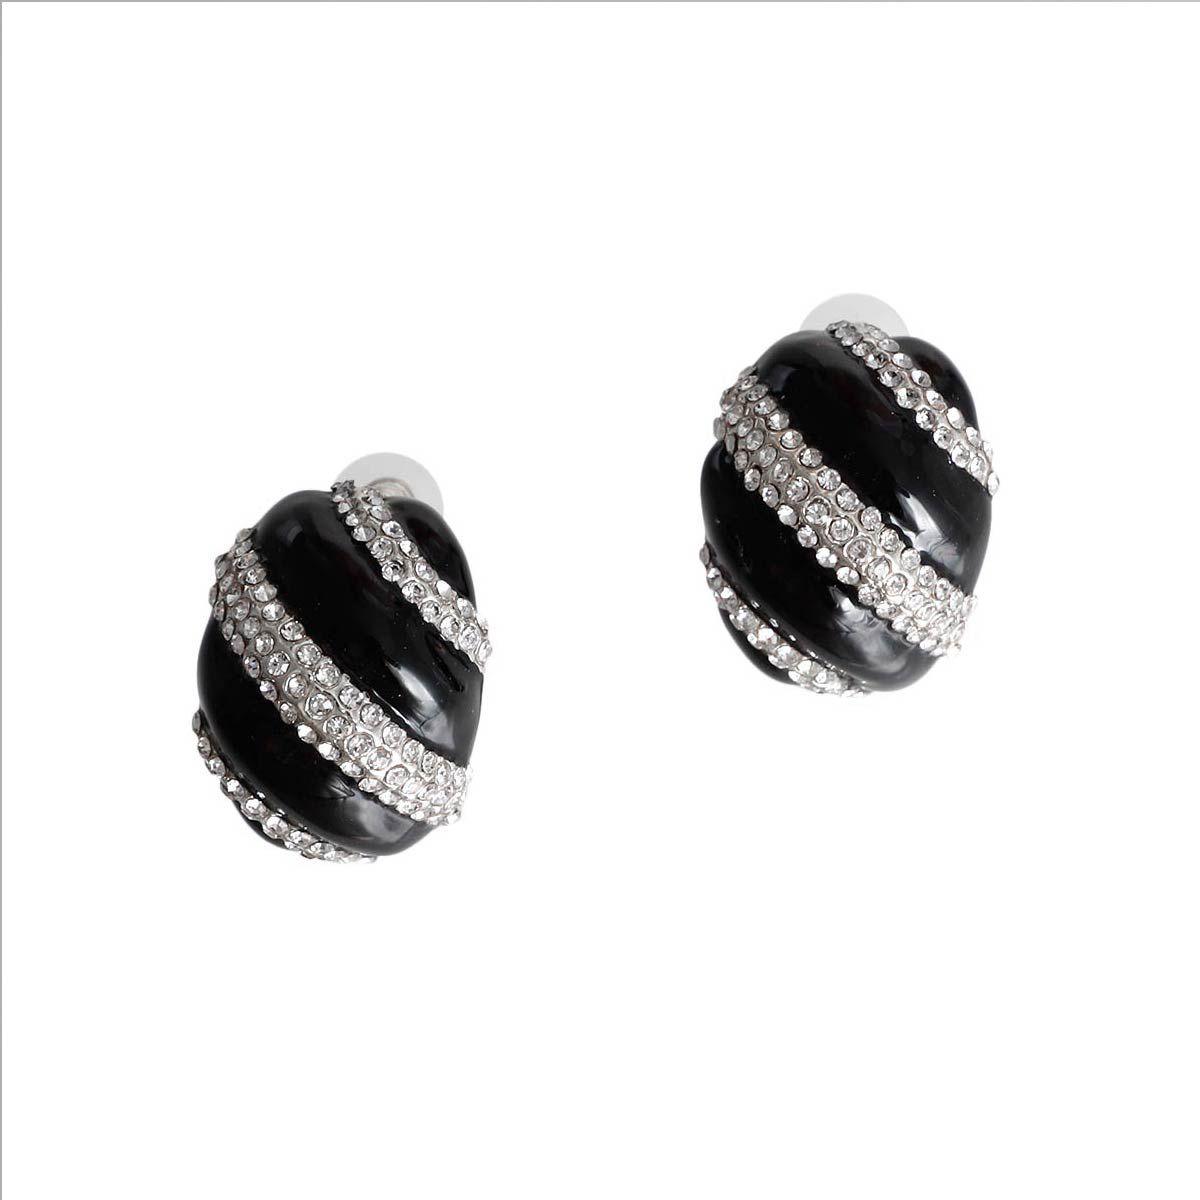 Black and Silver Dome Stud Earrings: Your Ultimate Fashion Statement!